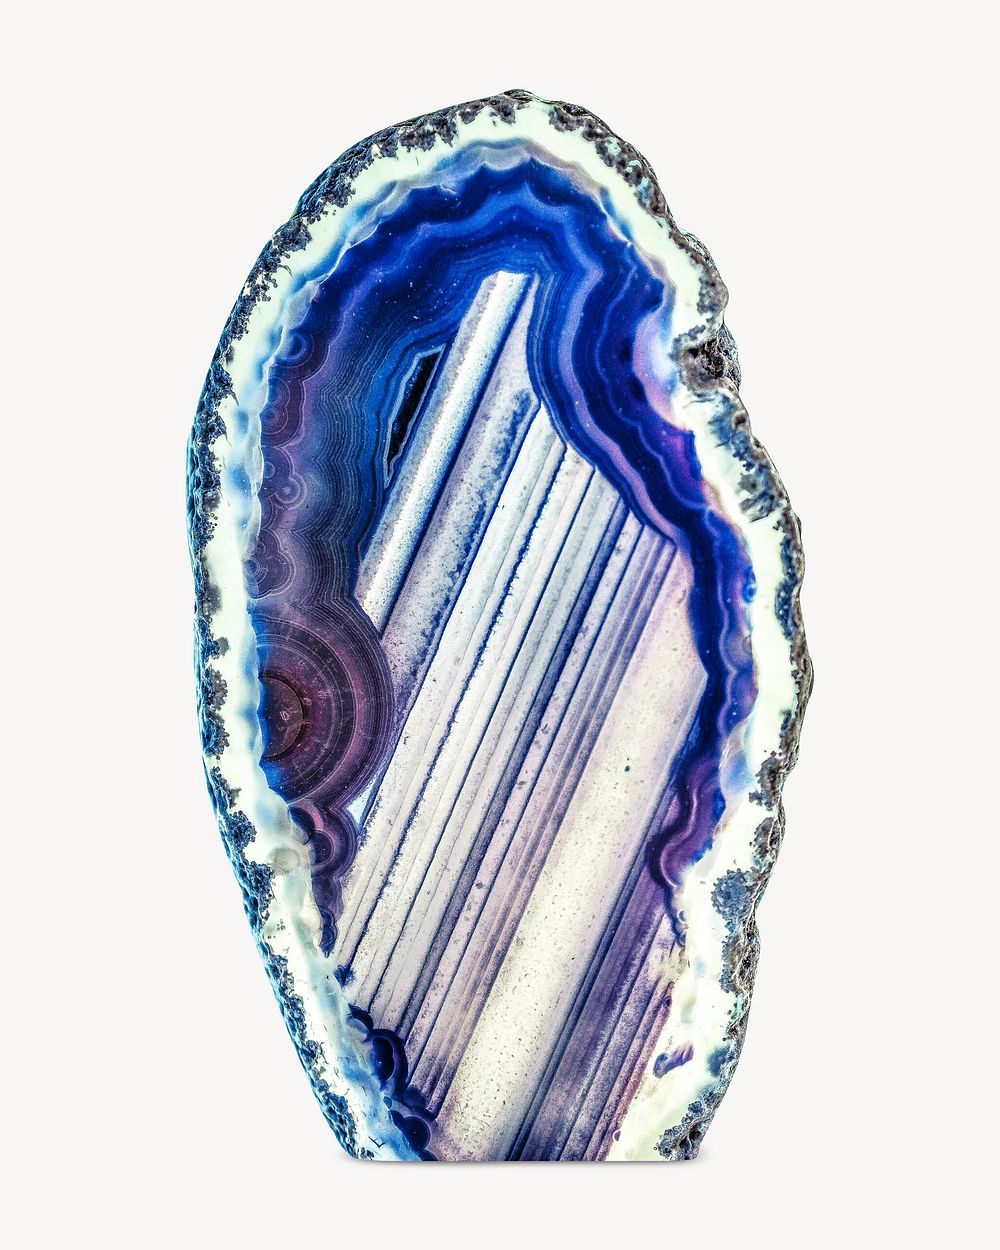 Blue geode, isolated object on white